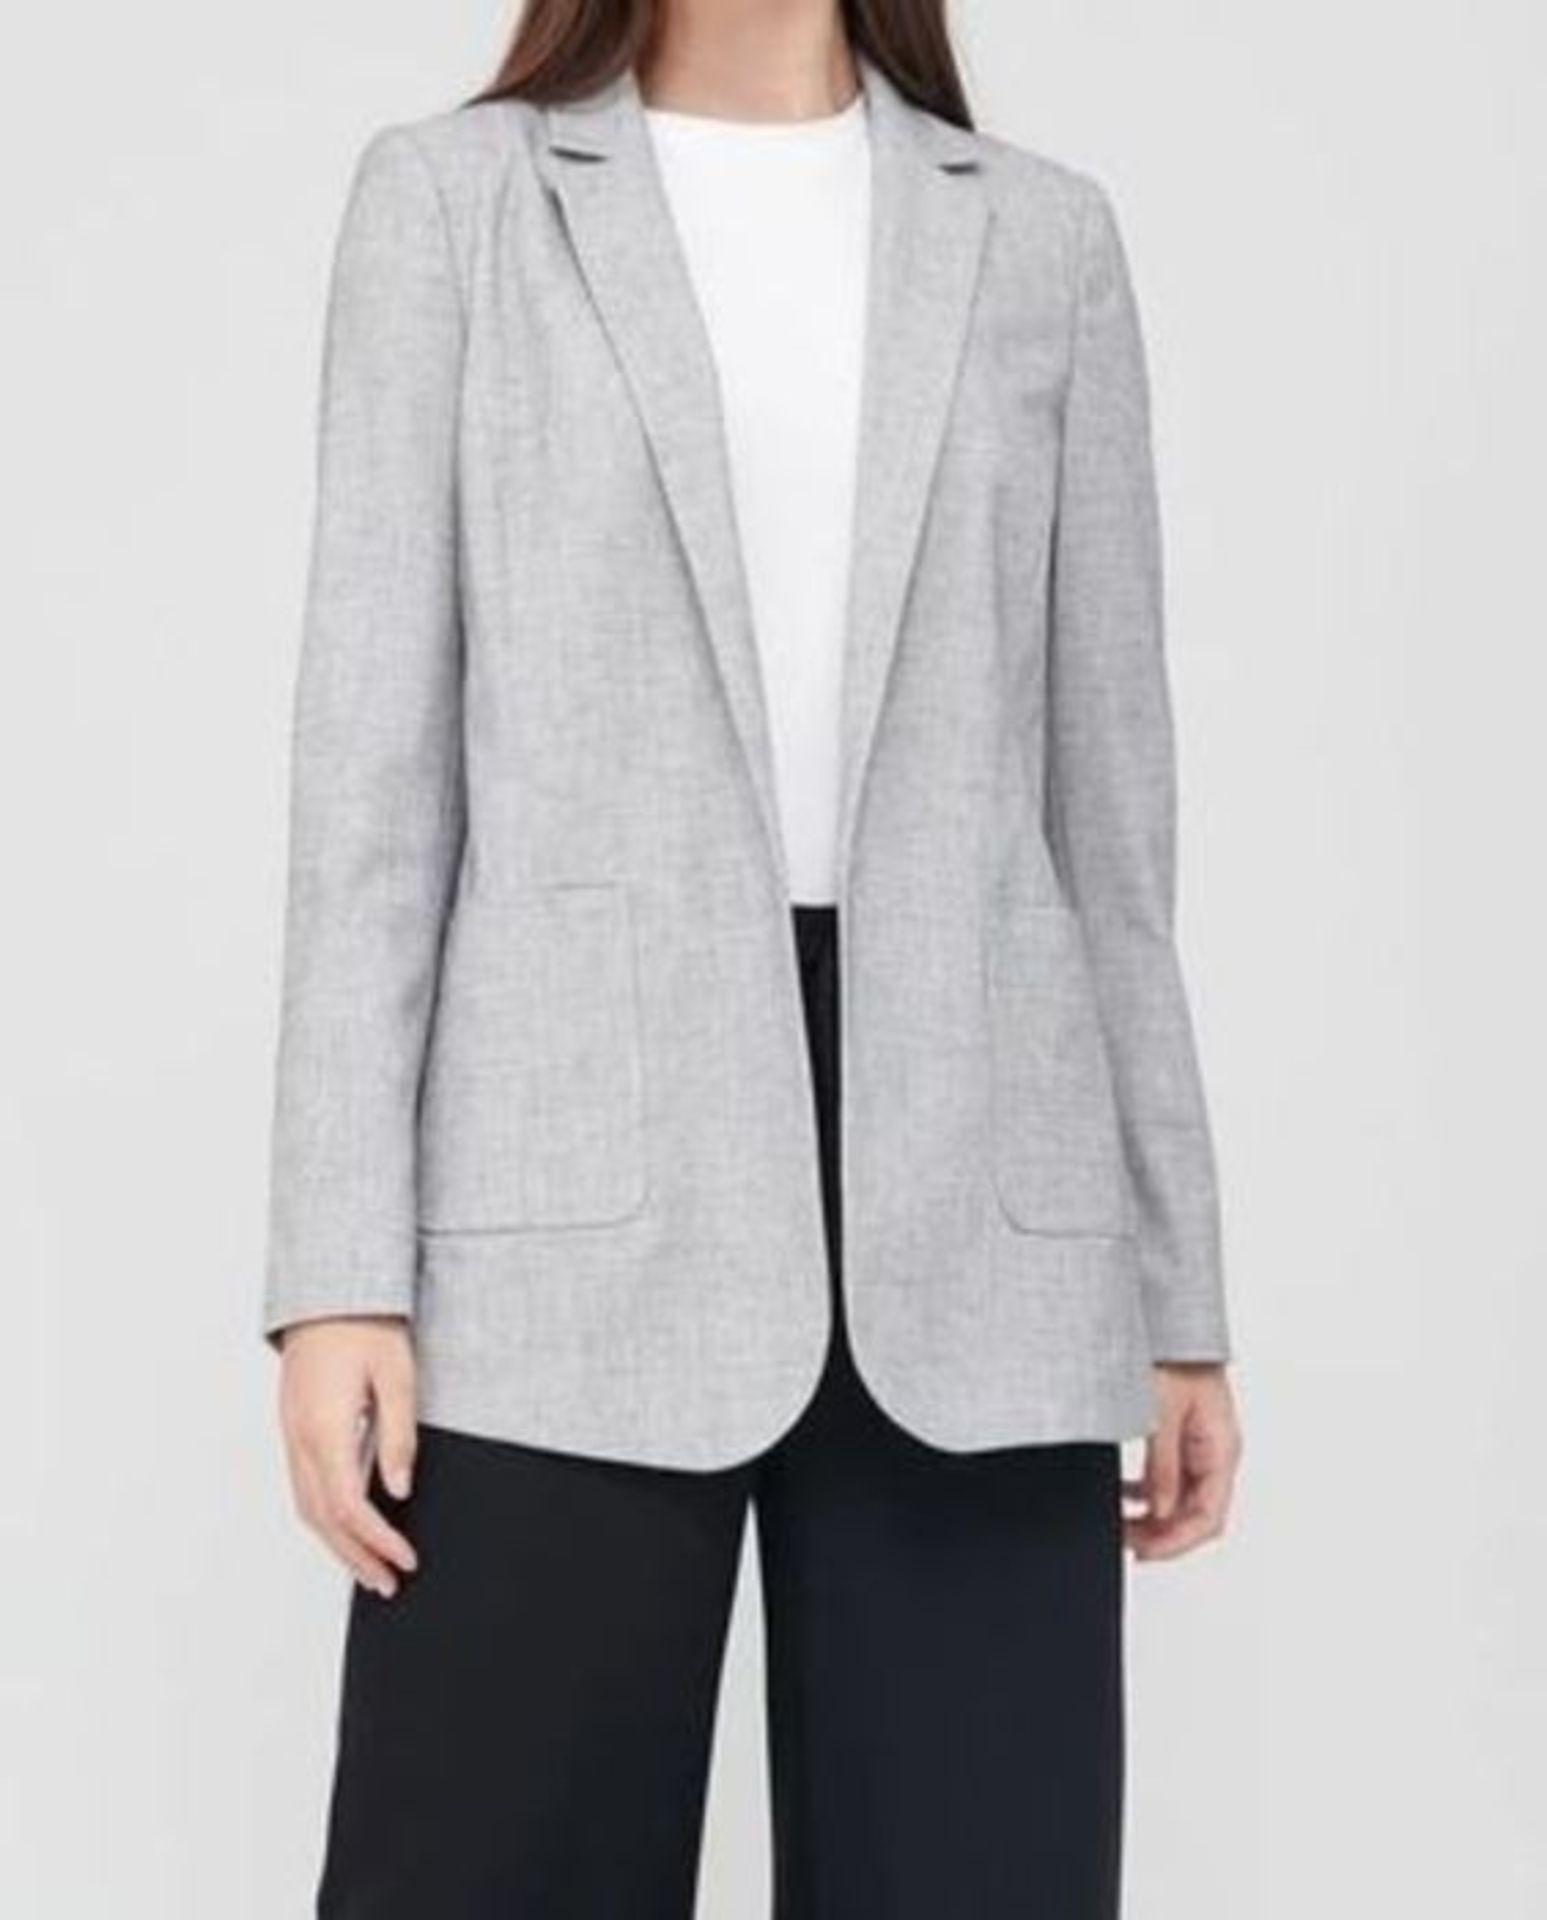 4 X V BY VERY POCKET EDGE TO EDGE JACKET - GREY / SIZE 10 / COMBINED RRP £140.00 / BRAND NEW WITH